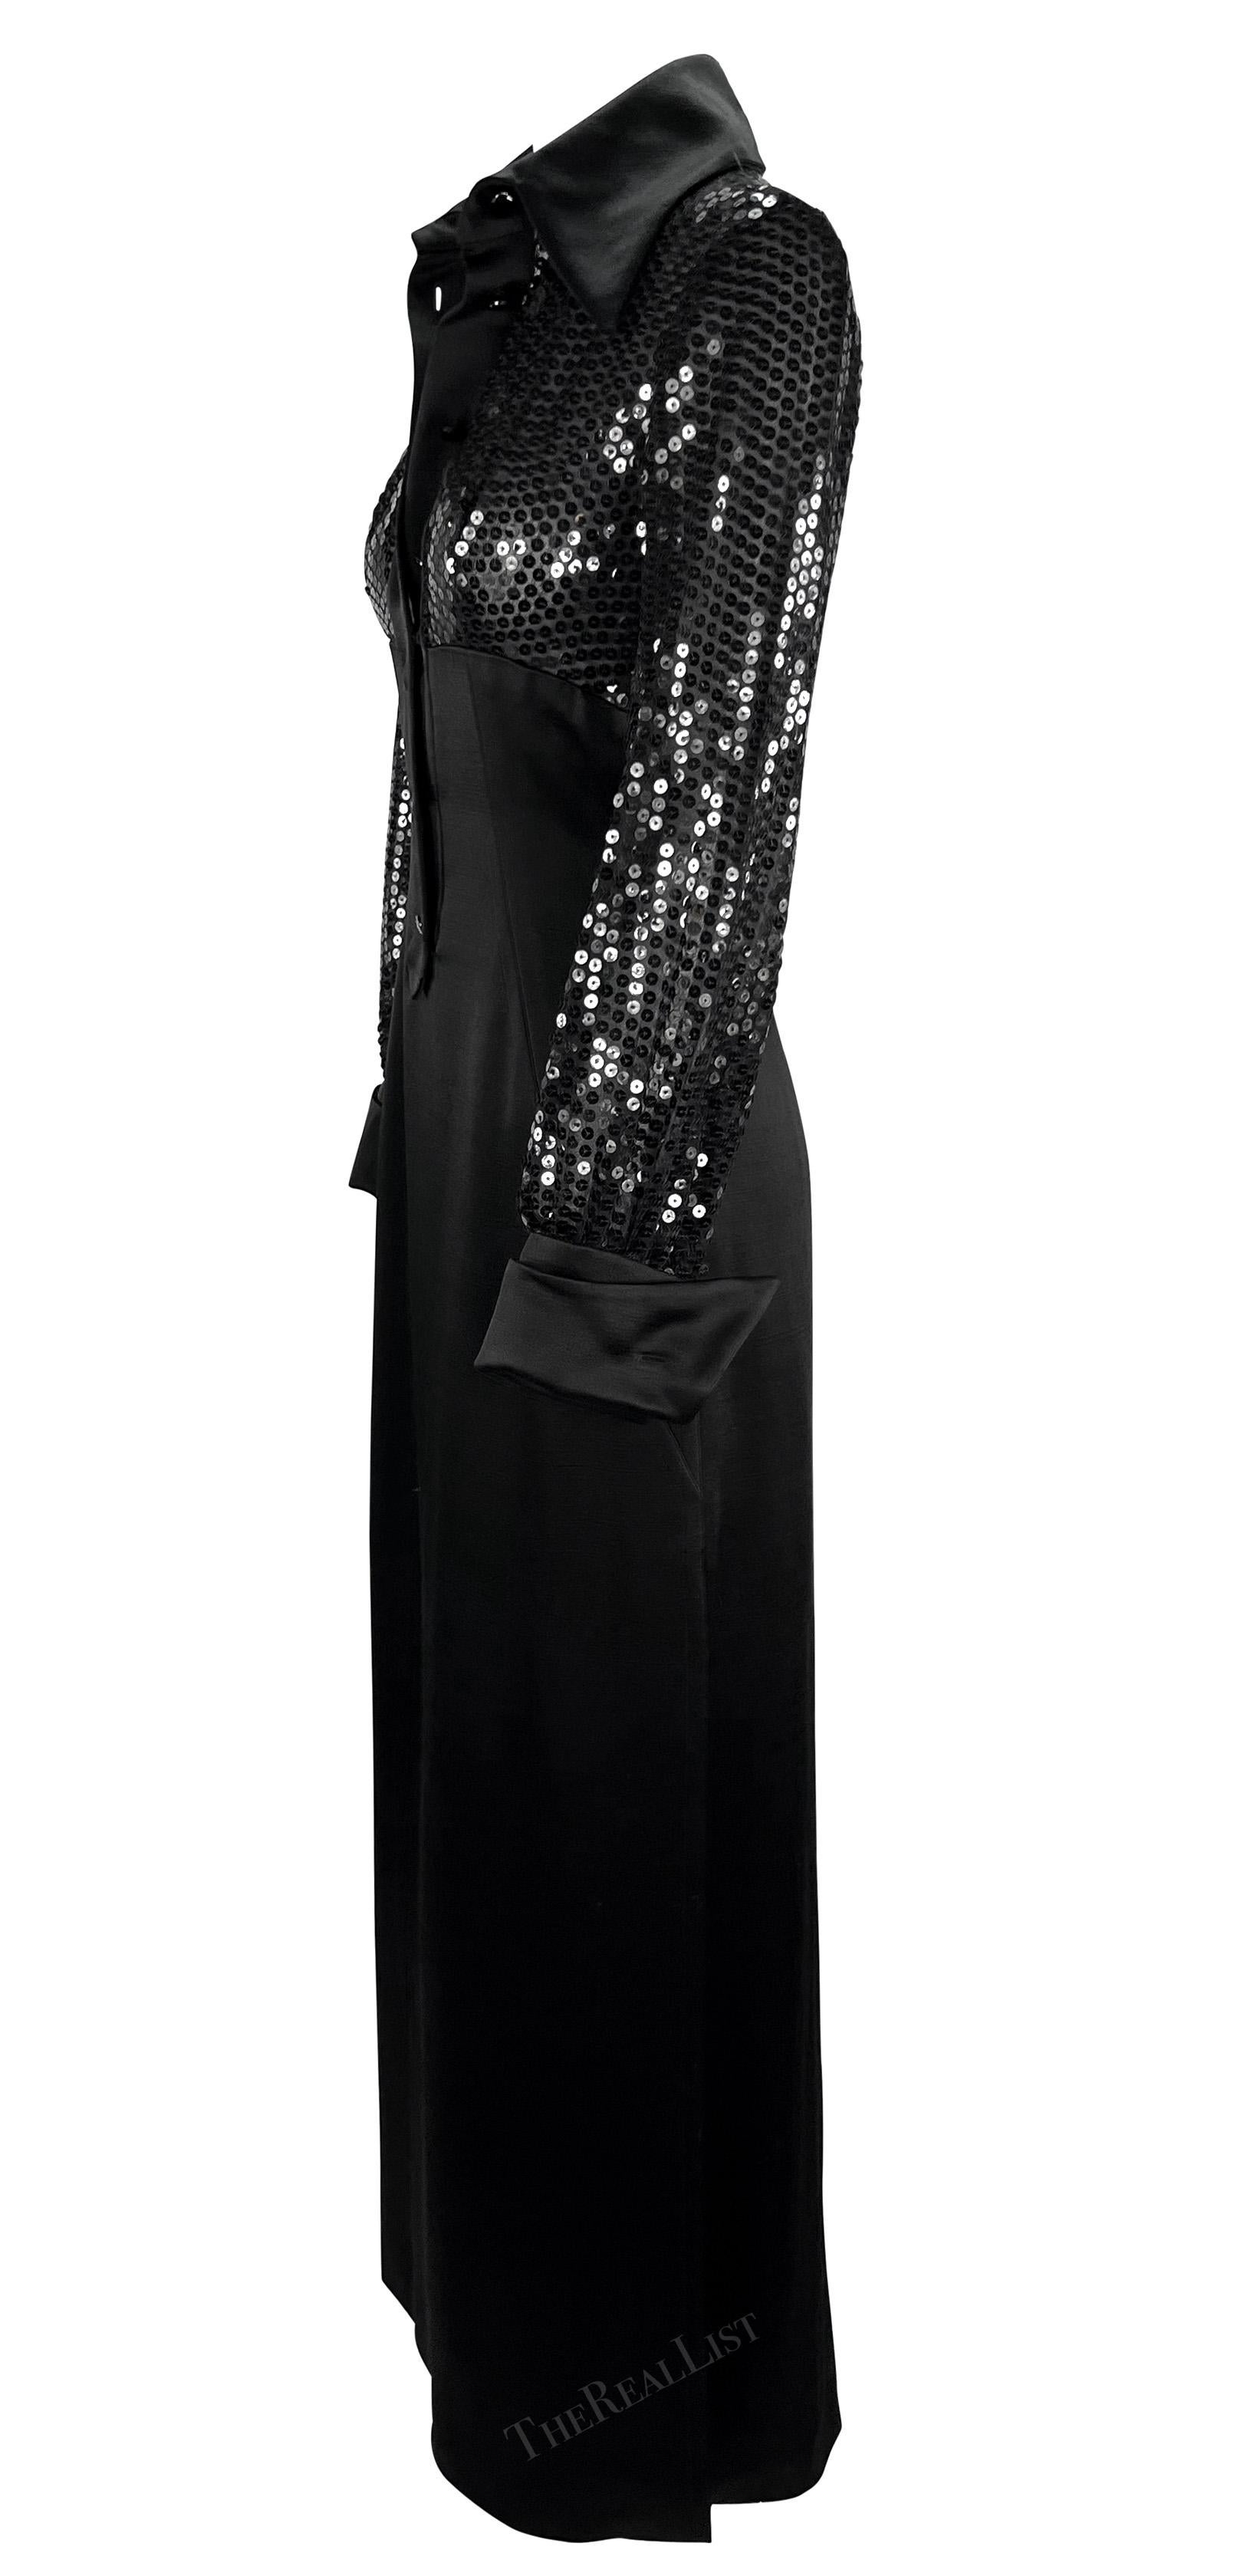 Women's 1990s Jacques Fath Sheer Black Sequin Plunging Satin French Cuff Collared Gown For Sale